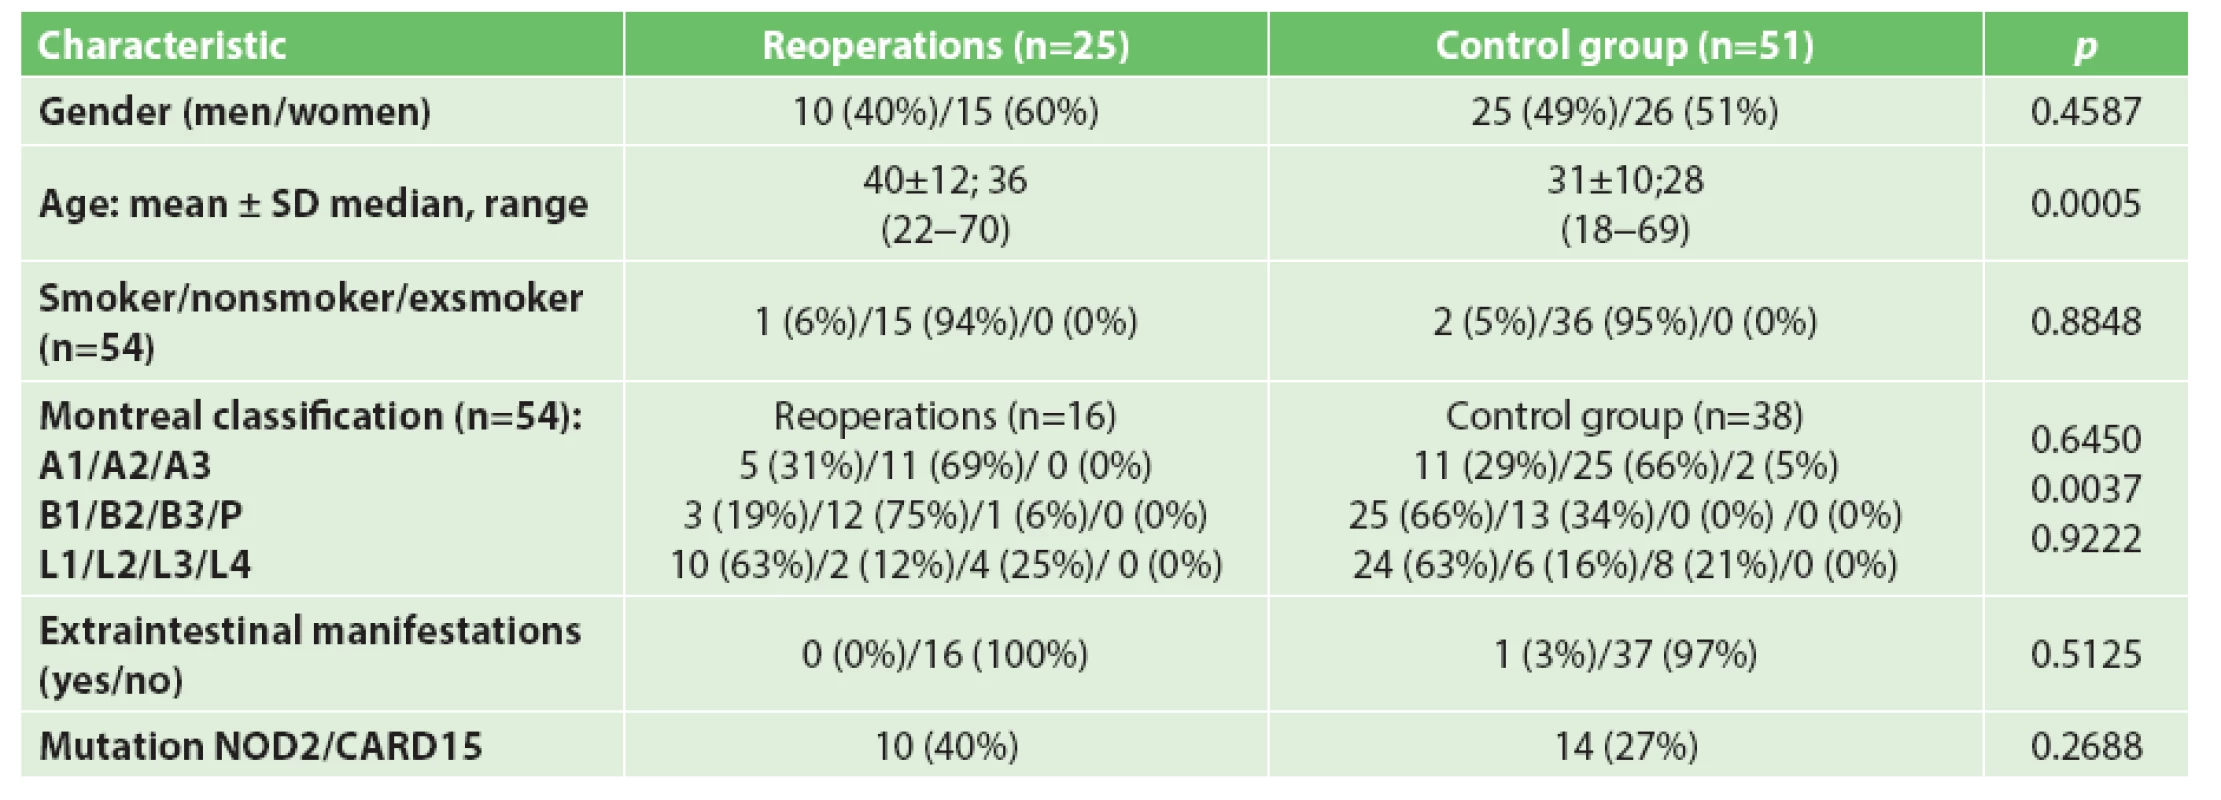 Demografic and clinical variables of patients with reoperations and control group